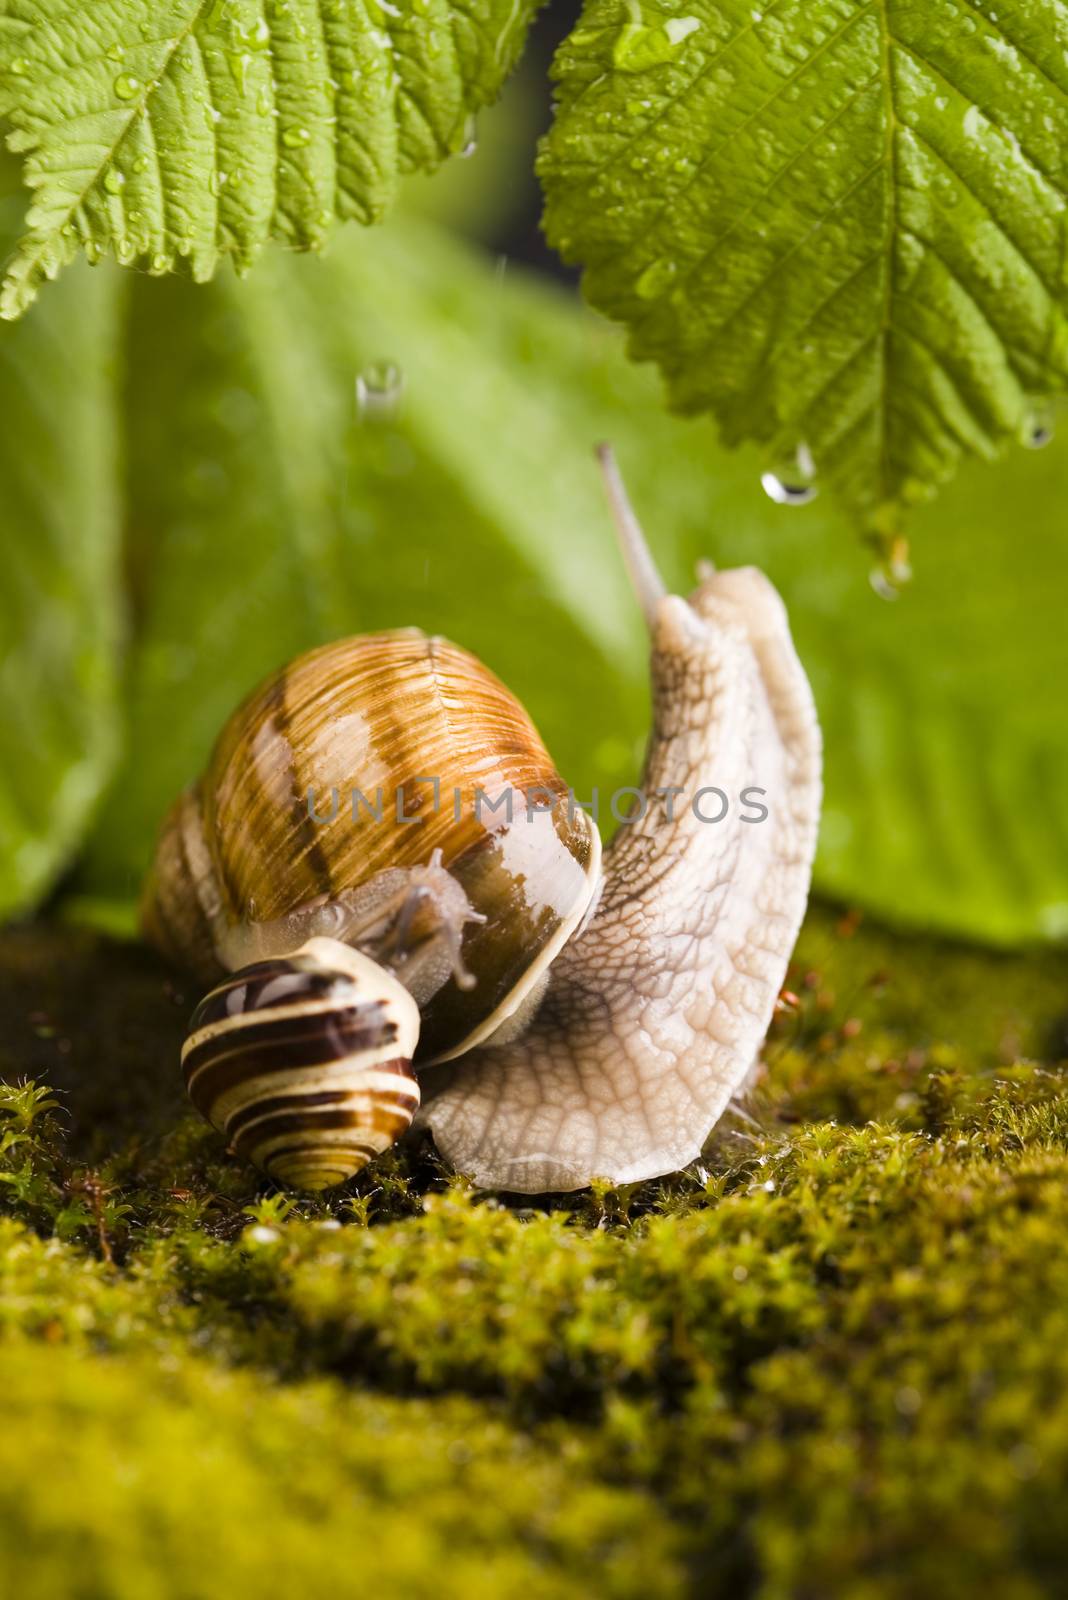 Snail, natural concept saturated colors